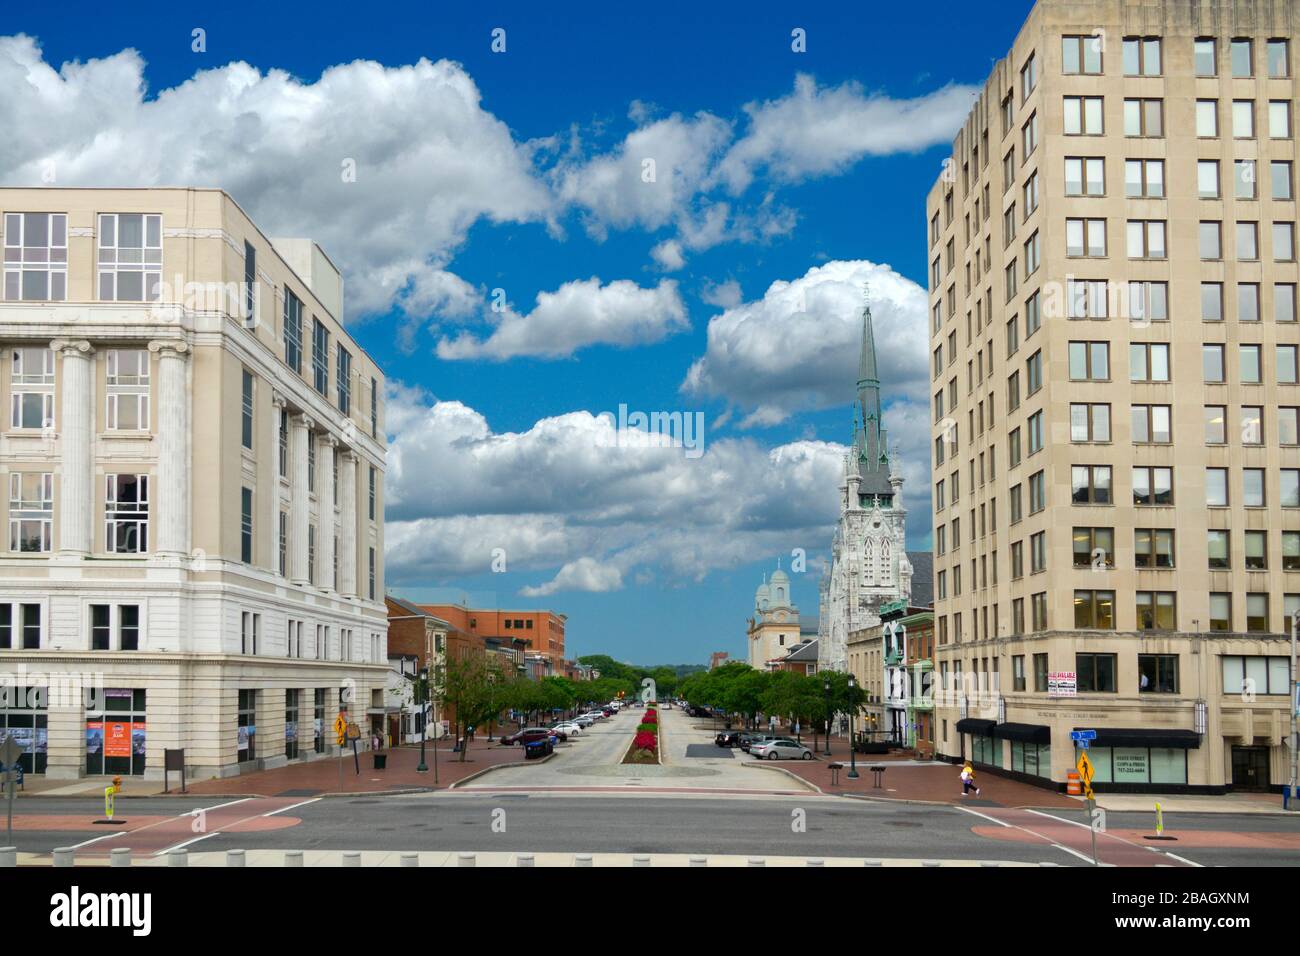 View of the historic downton district of Harrisburg Pennsylvania from the steps of the Capitol building Stock Photo